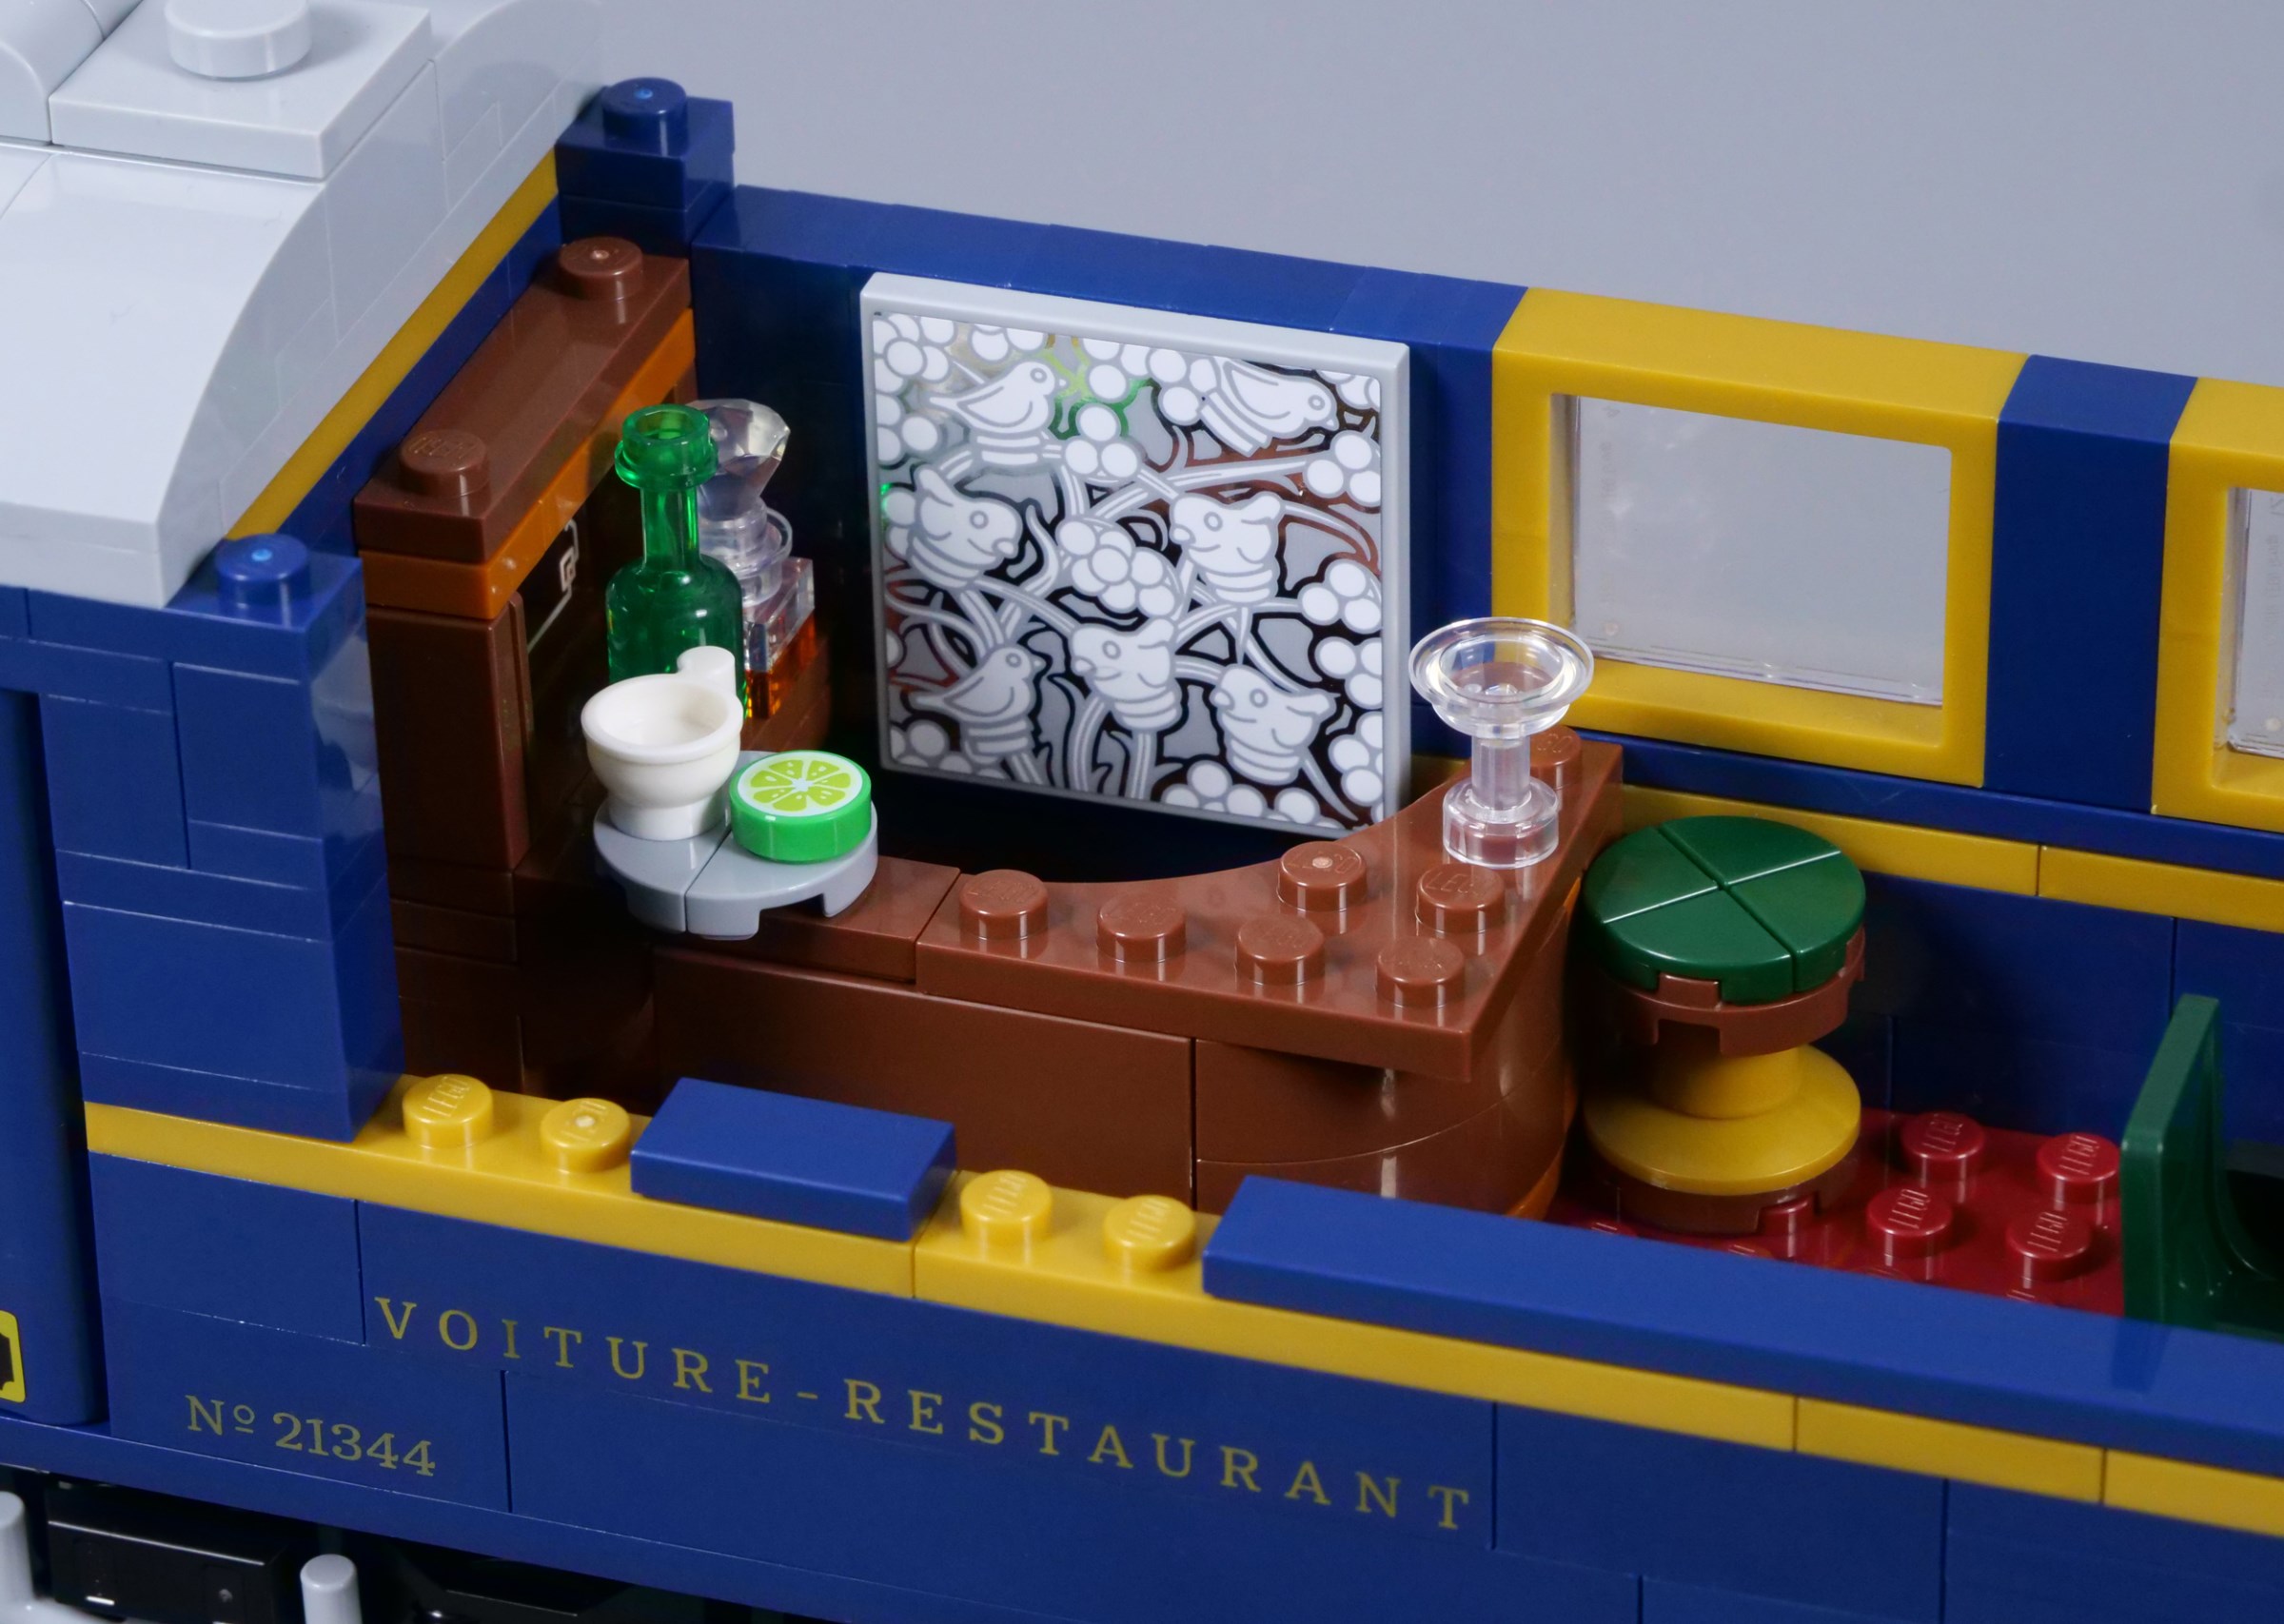 LEGO Ideas 21344 Orient Express revealed [News] - The Brothers Brick